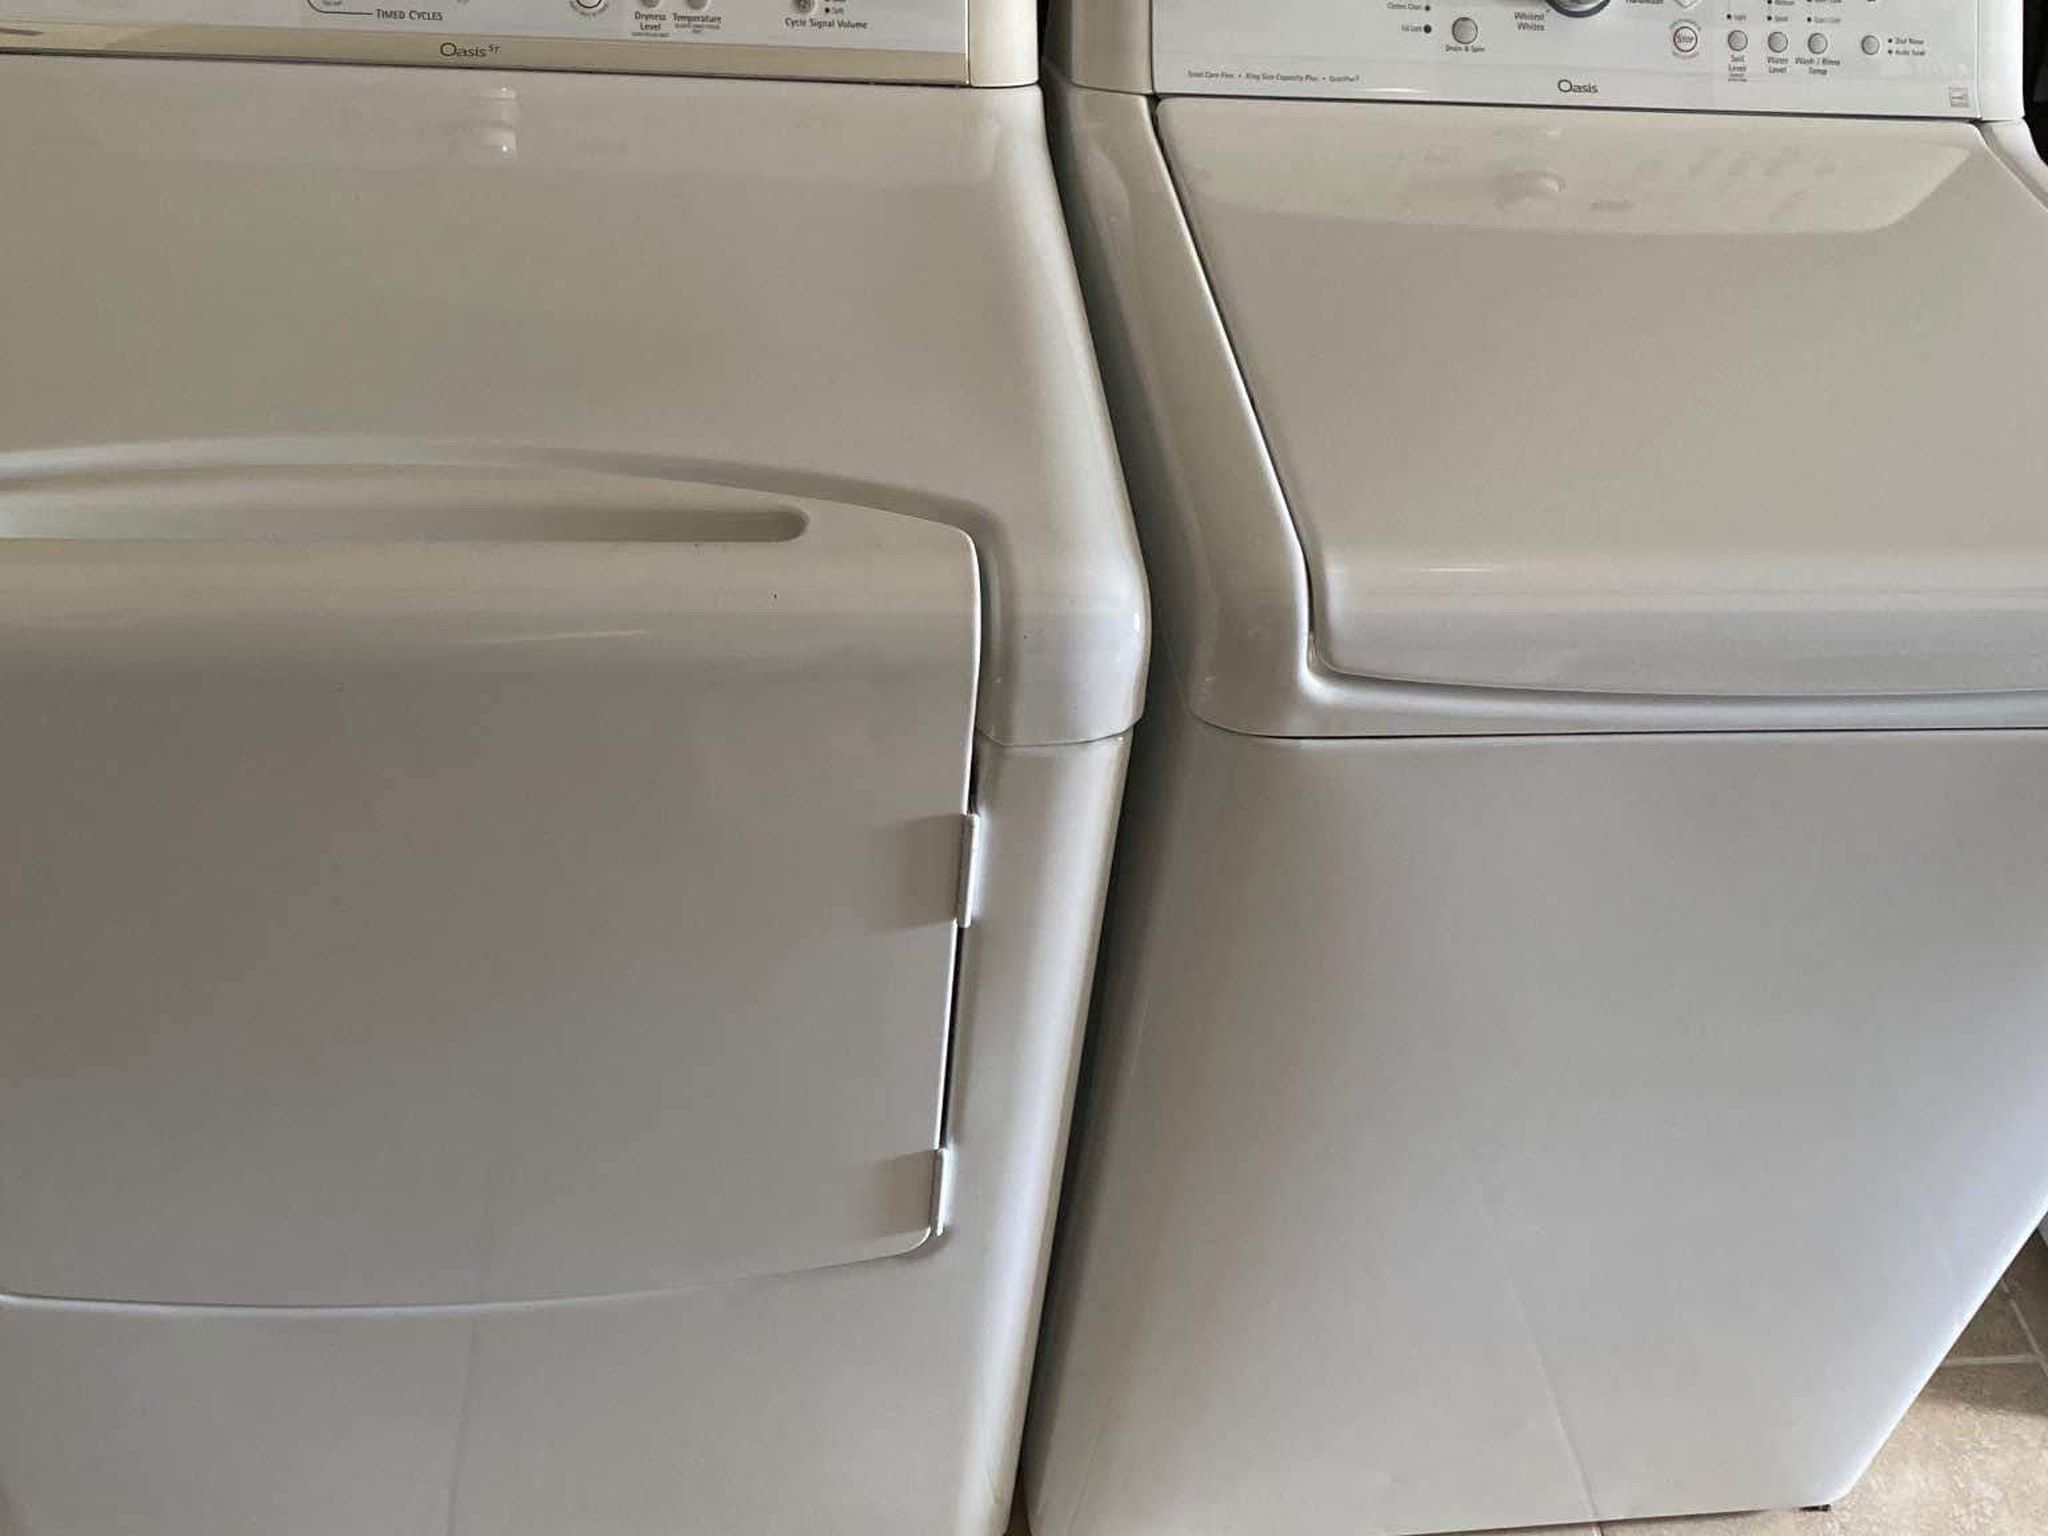 KENMORE ELITE OASIS HE XL WASHER & DRYER SET !!! ELECTRIC ⚡️ FREE DELIVERY & FREE INSTALL